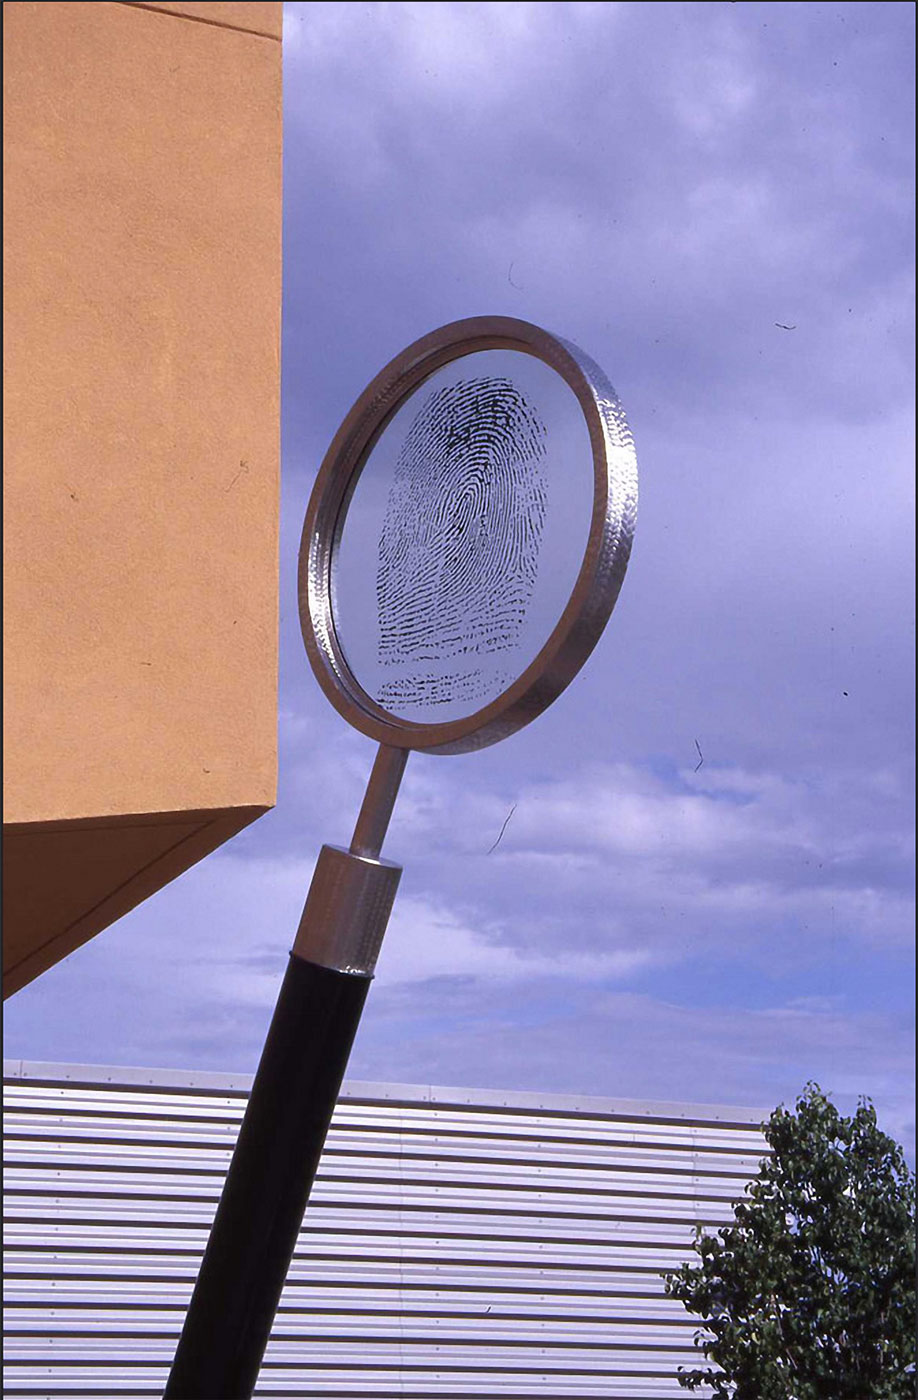 Sleuth Magnifiying Glass Showing Print (1920 300)